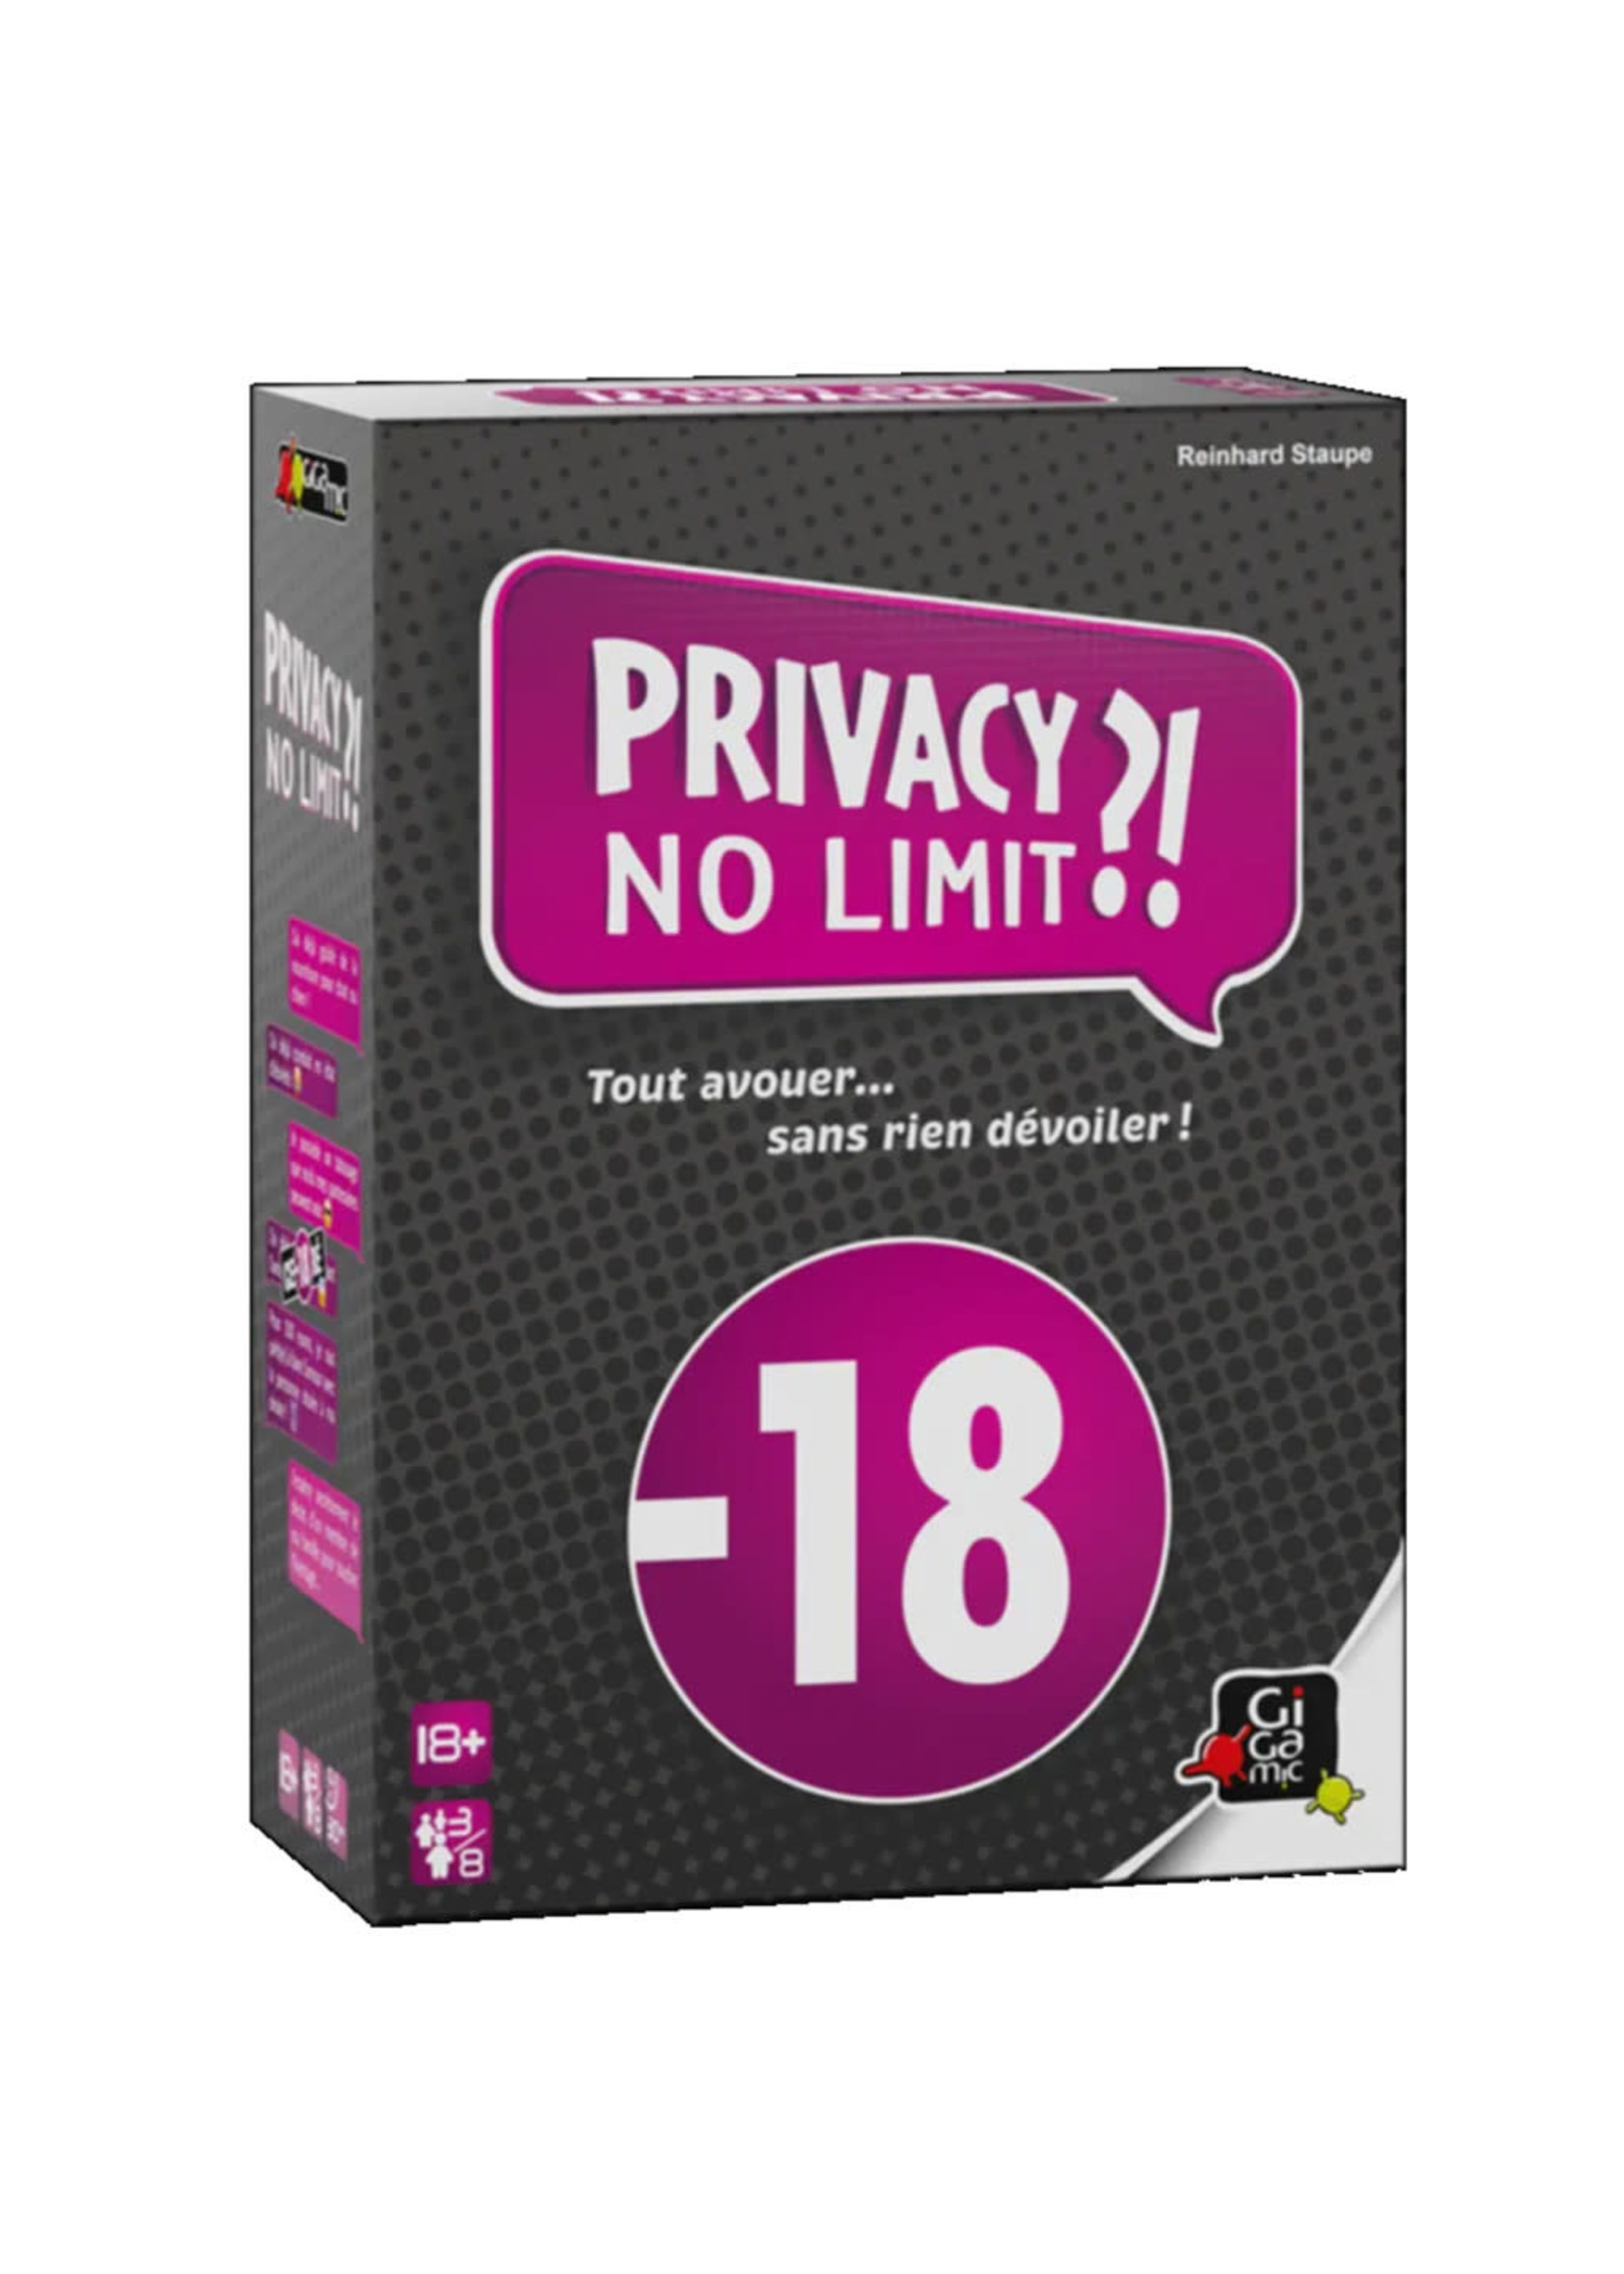 Gigamic Privacy No limit ?! (FR)